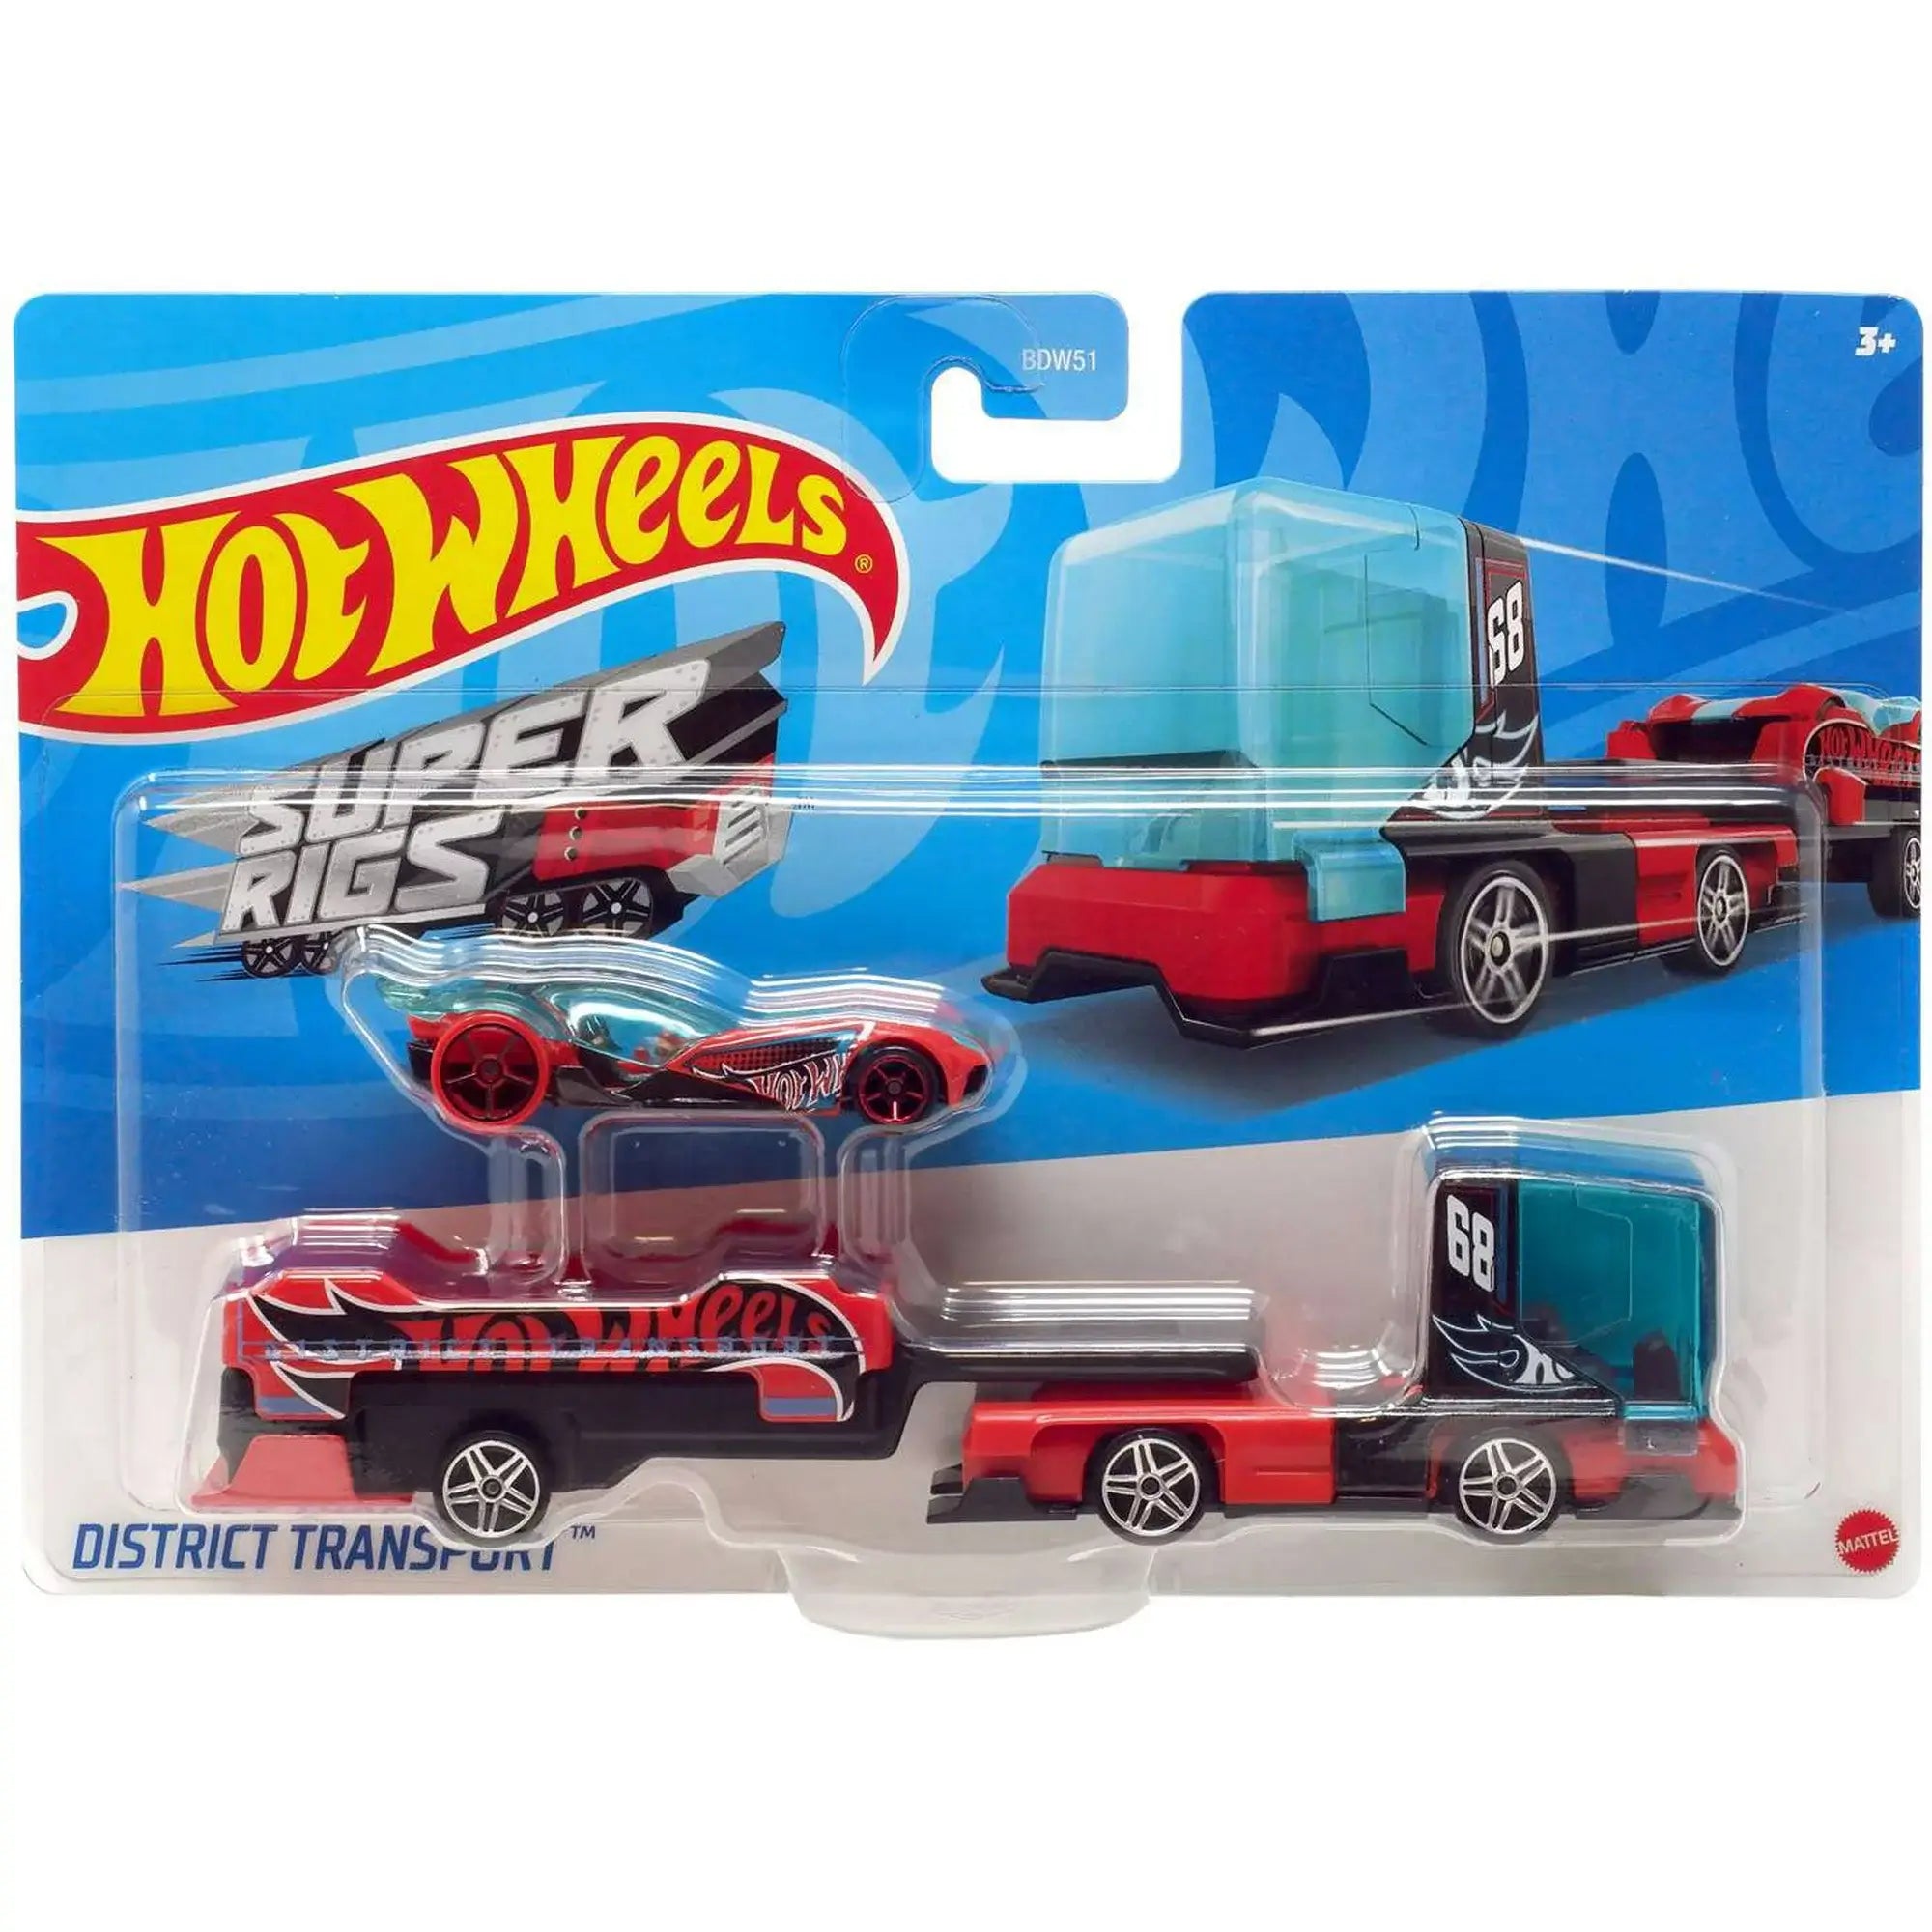 Hot Wheels Super Rigs District Transport Vehicle in package.